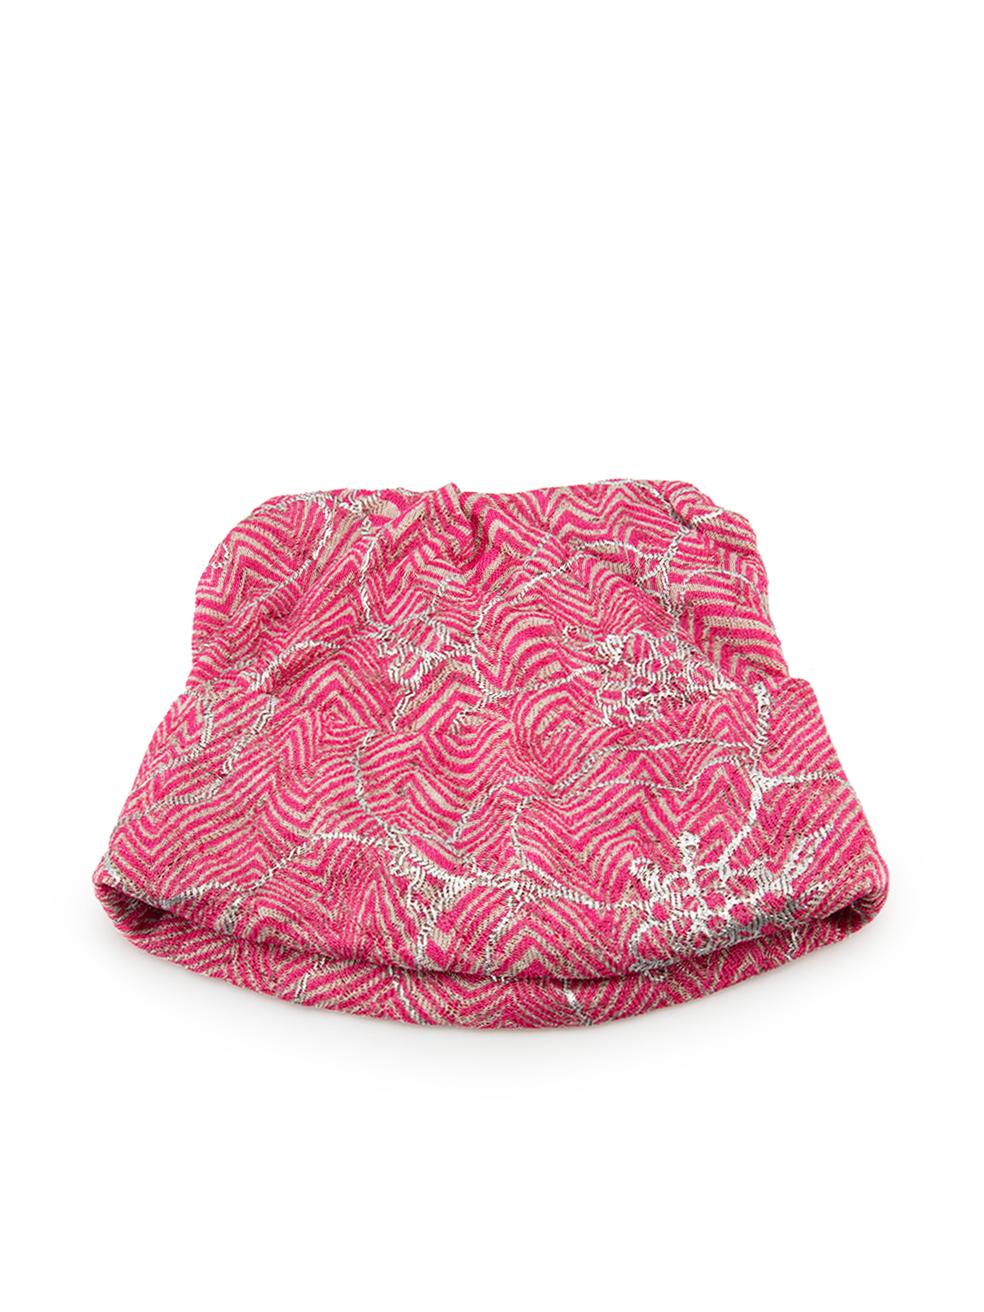 Missoni Pink Knitted Folded Edge Hat In Good Condition For Sale In London, GB